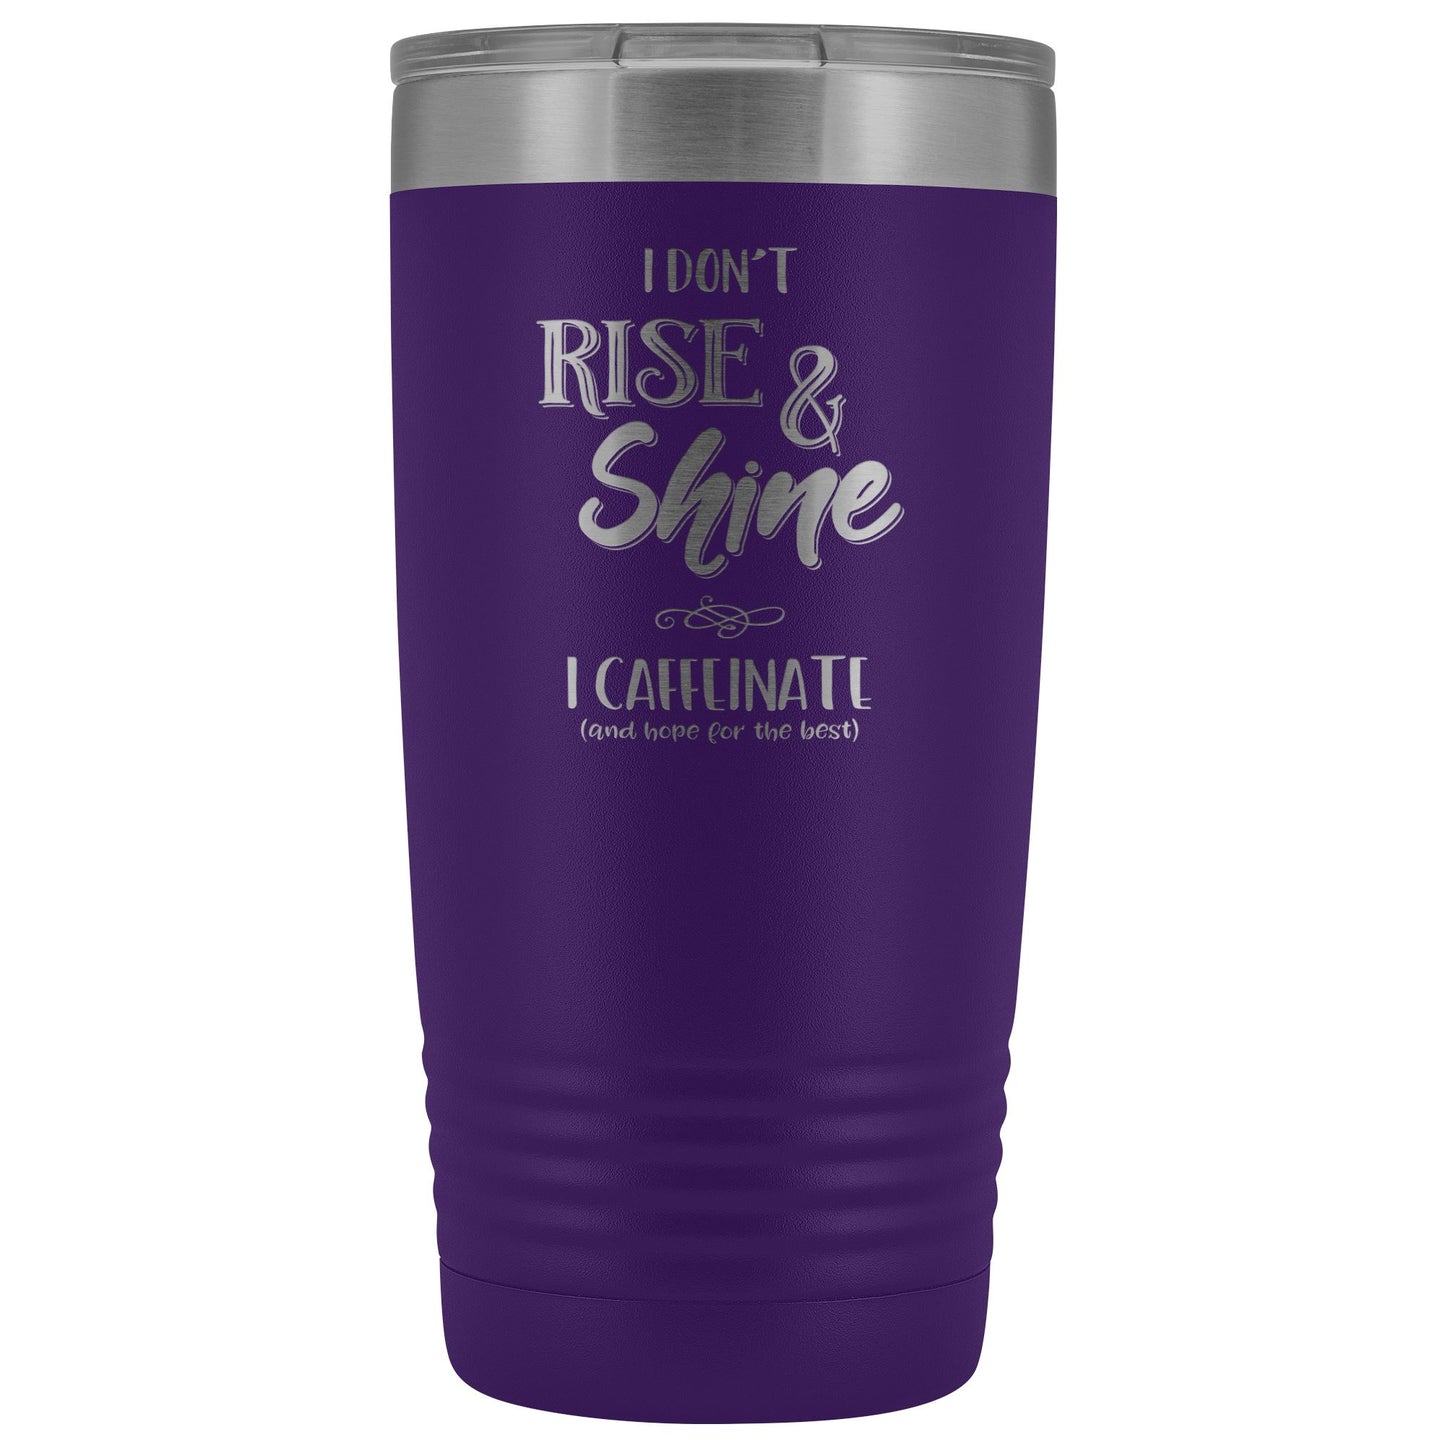 I Don't Rise & Shine, I Caffeinate and Hope for the Best 20oz Insulated Coffee Tumbler